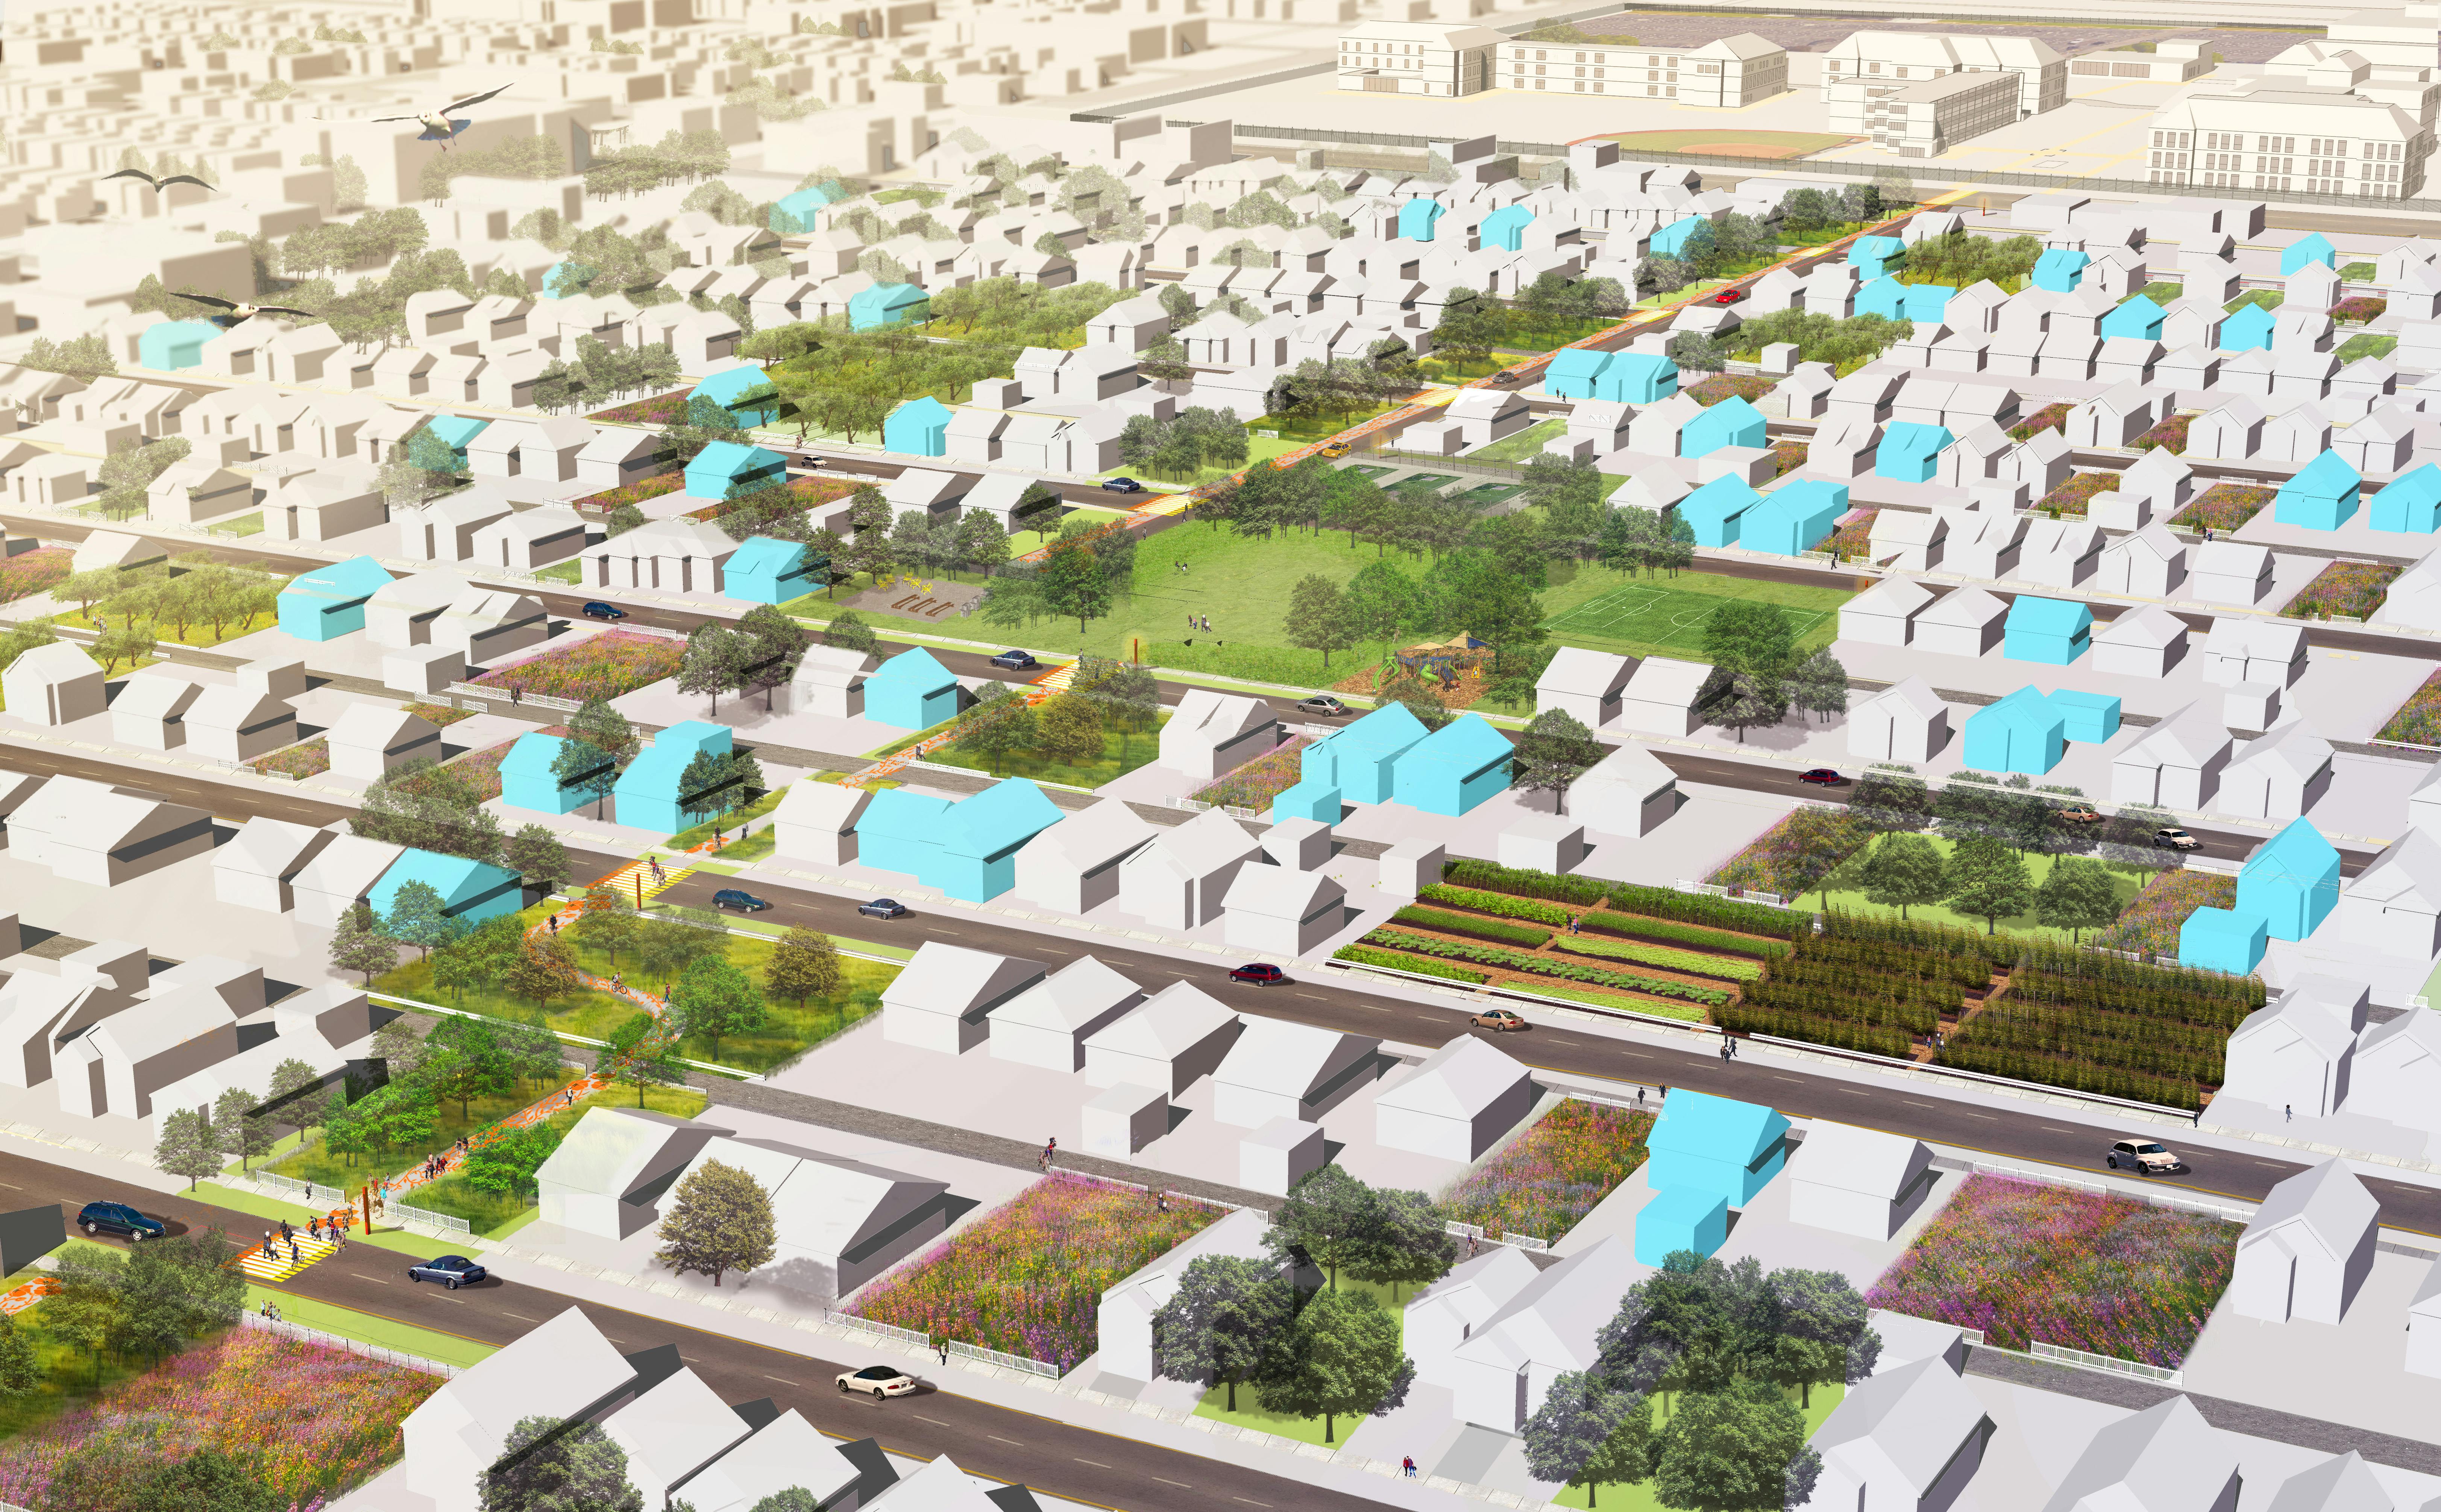 Bird's eye view rendering of Fitzgerald neighborhood with proposed greenway and various landscape typologies implemented across vacant lots within neighborhood.